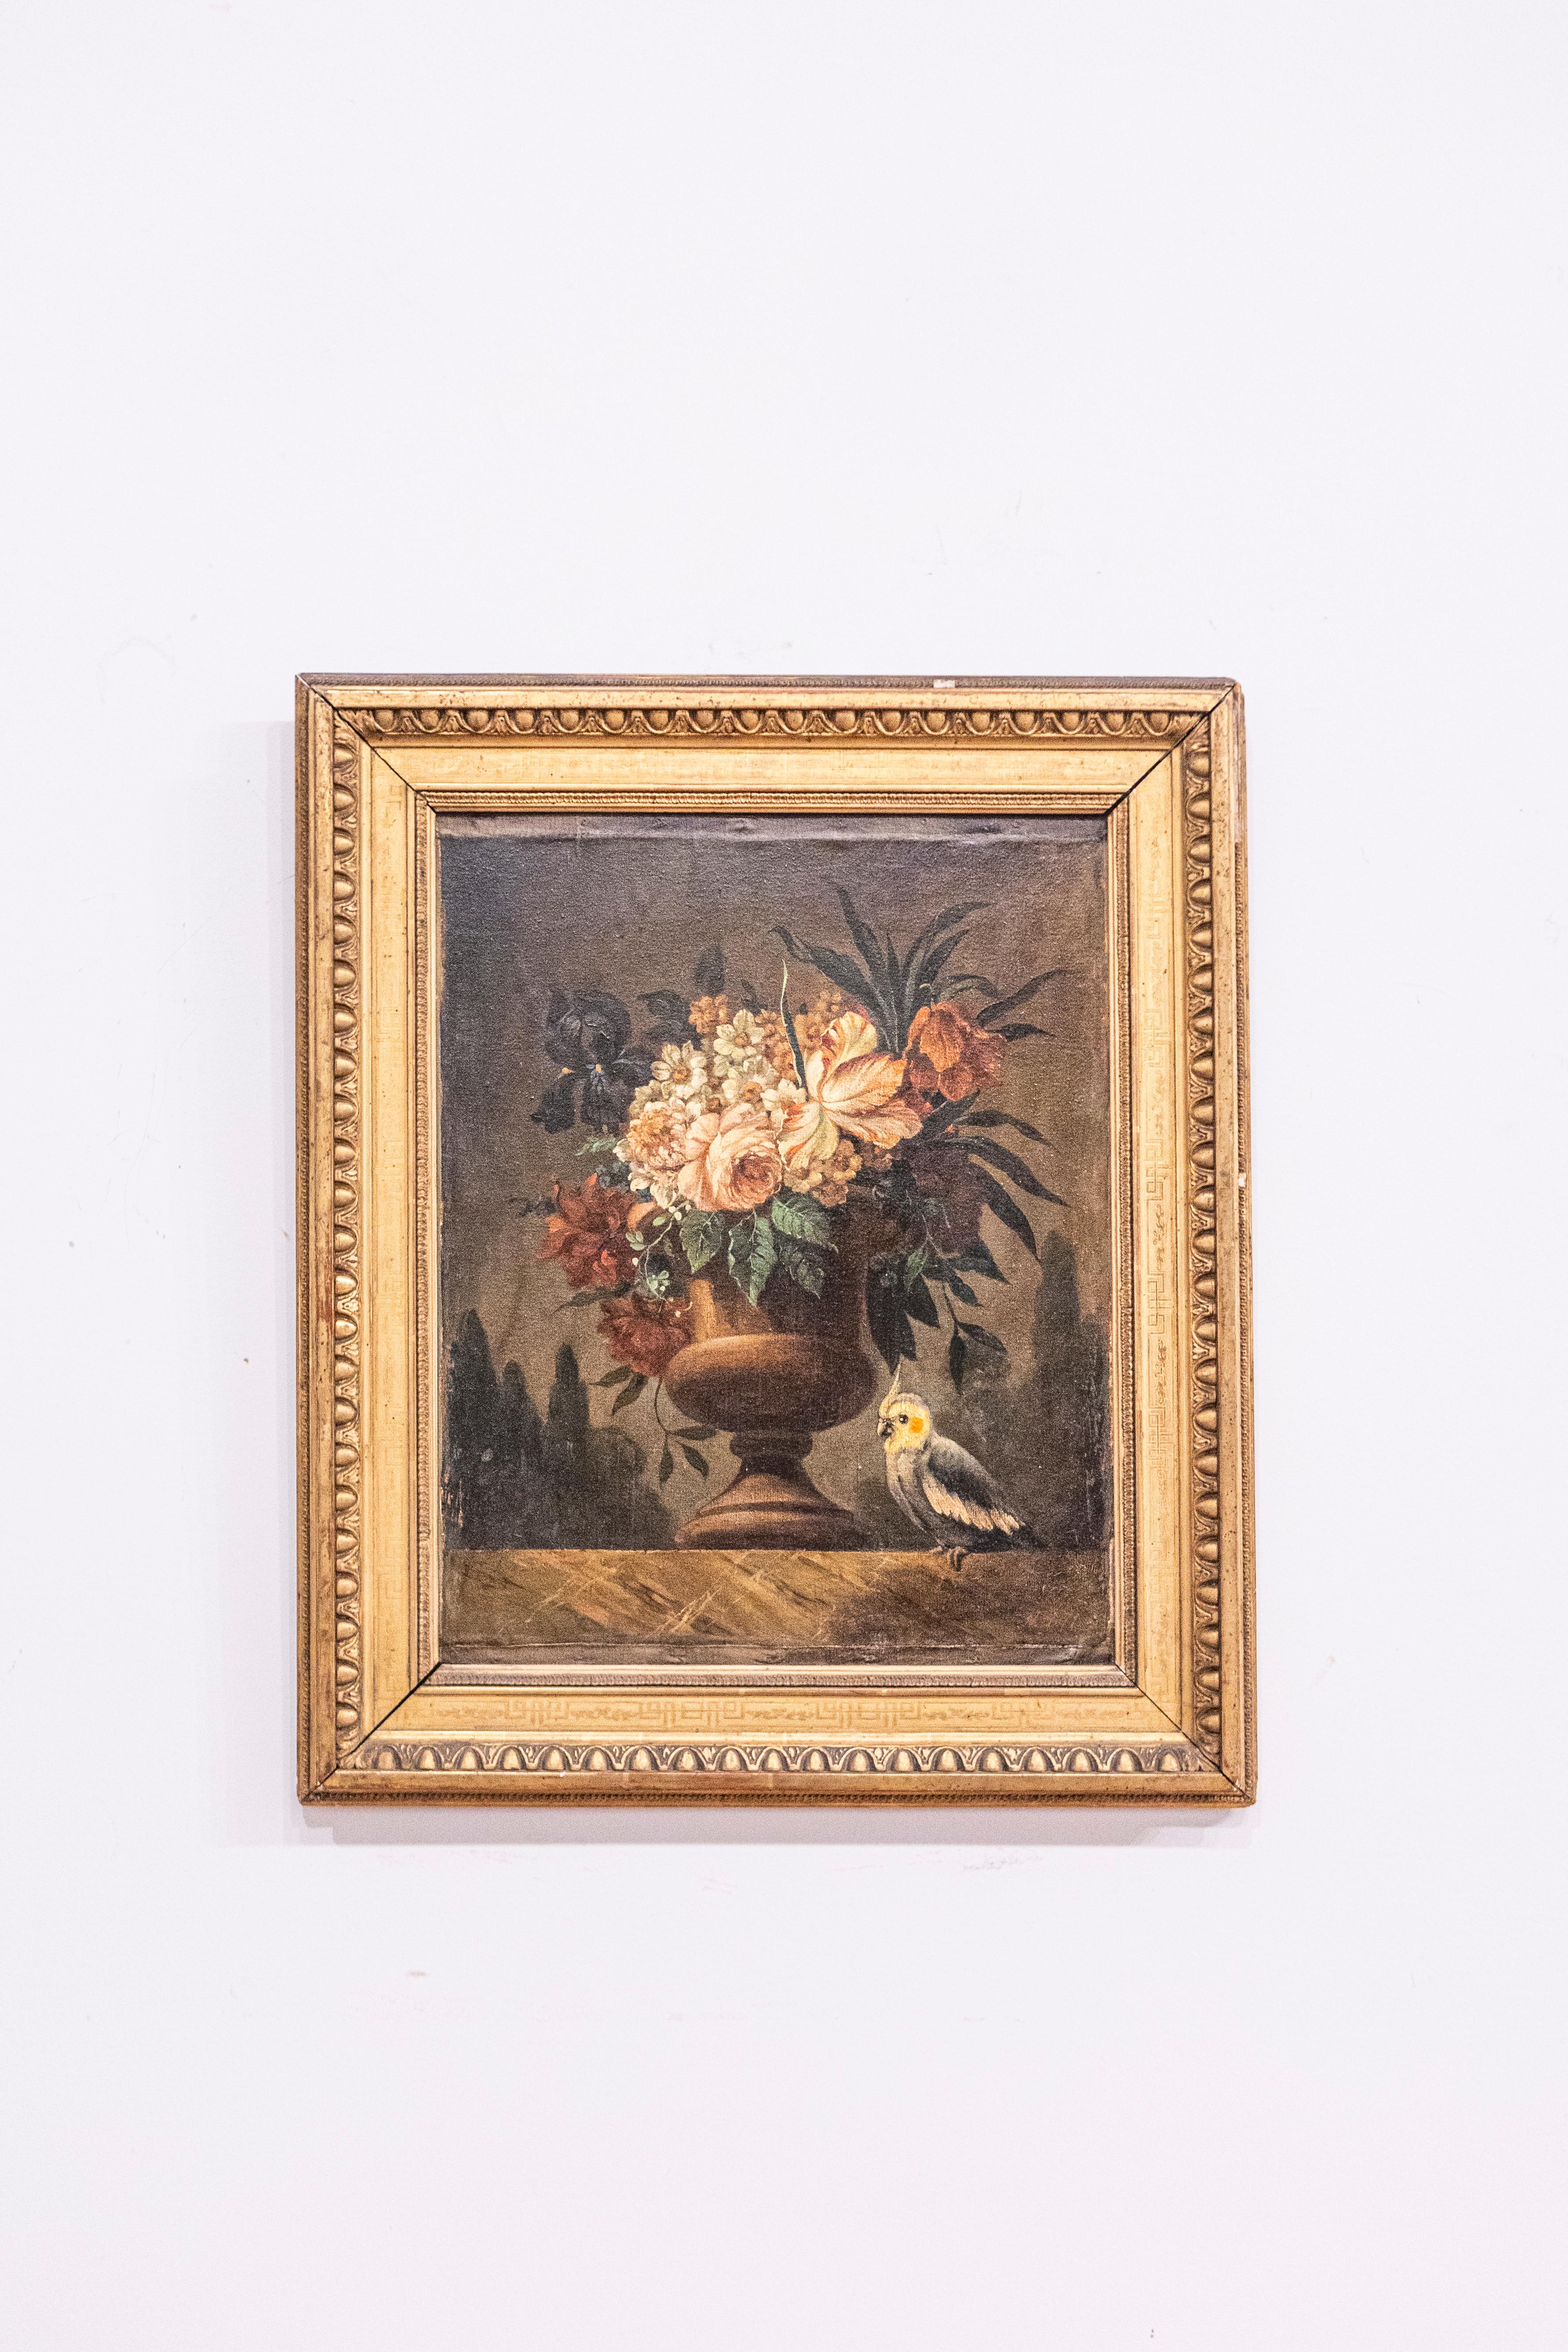 A French framed oil on canvas still-life painting from the 18th century, depicting a bouquet of flowers and a parakeet. Born in France during the Age of Enlightenment, this lovely oil painting of vertical format features a luscious bouquet of pink,